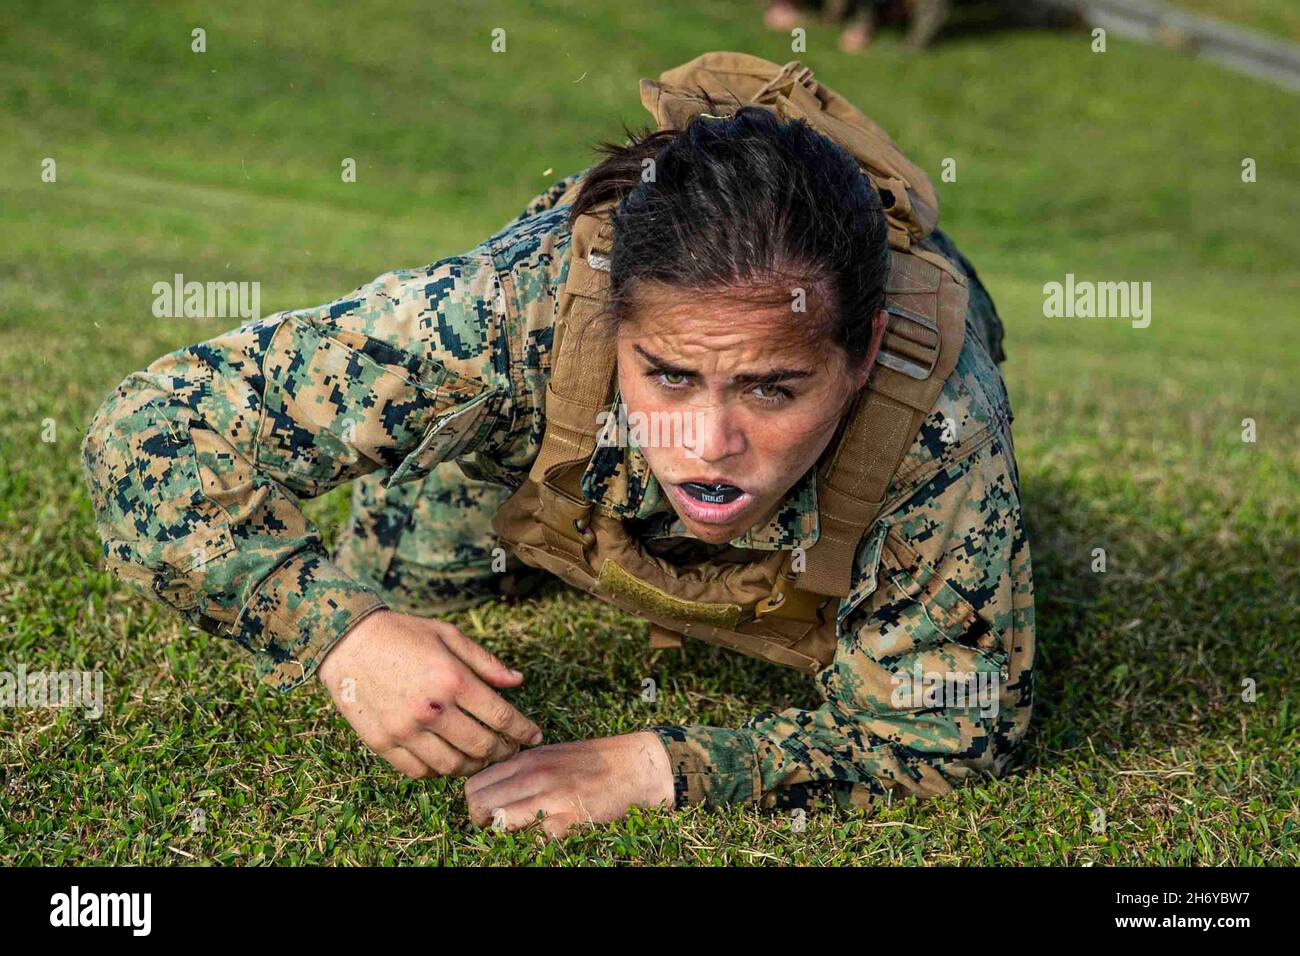 Japan. 4th Nov, 2021. U.S. Marine Cpl. Abigail Hermenegildo, an intelligence specialist with Battalion Landing Team 3/5, 31st Marine Expeditionary Unit (MEU), crawls up a hill during a Martial Arts Instructor Course culminating event at Camp Hansen, Okinawa, Japan, Nov. 4, 2021. The Martial Arts Instructor Course is designed to teach Marine Corps Martial Arts Program (MCMAP) principles and combat conditioning to prepare Marines as MCMAP instructors. The 31st MEU, the Marine Corps' only continuously forward-deployed MEU, provides a flexible and lethal force ready to perform a wide range of Stock Photo